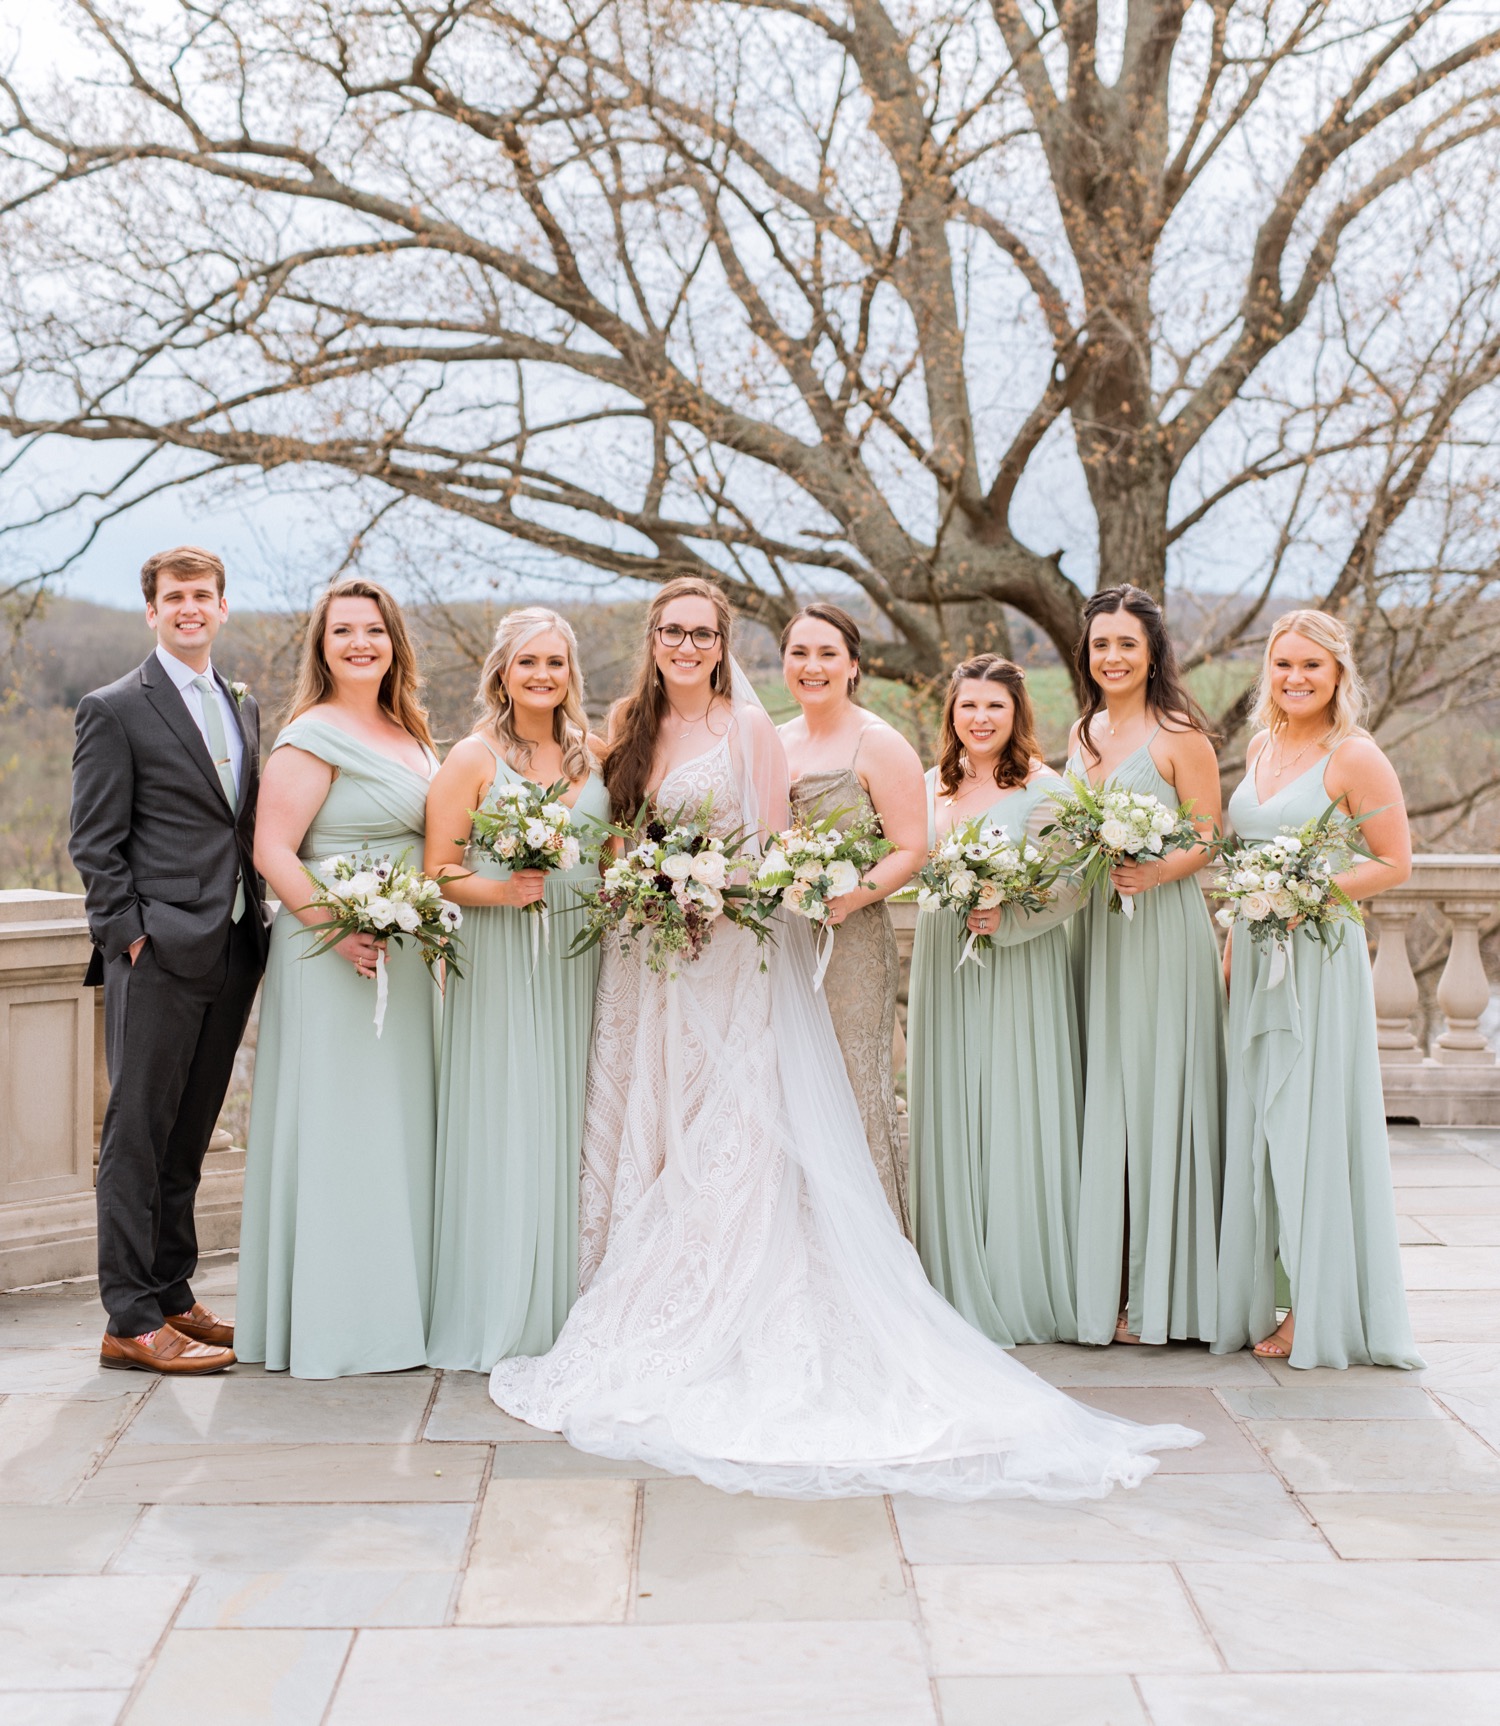 Bride and bridal party showcase their happiness at wedding in Richmond Virginia